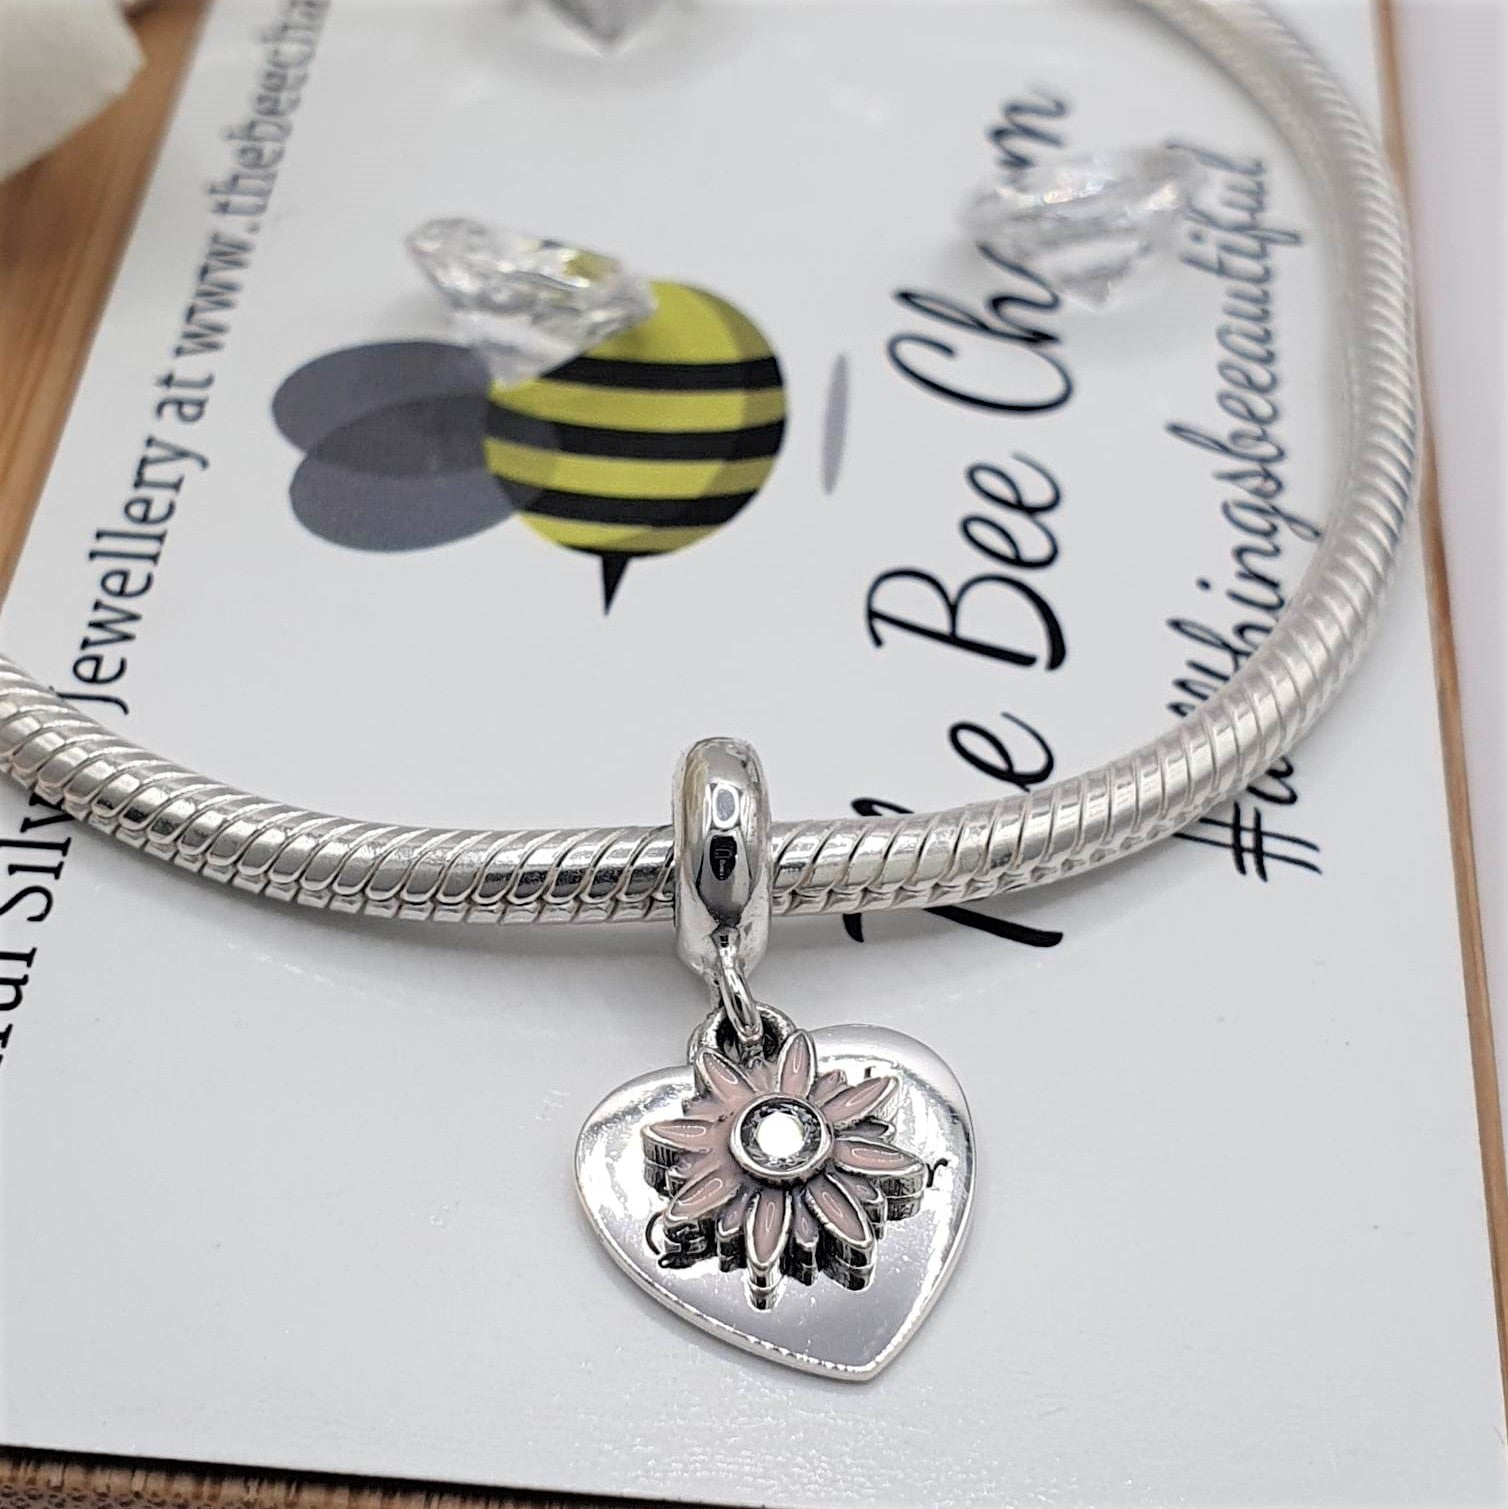 Grand Daughter Charm - The Bee Charm